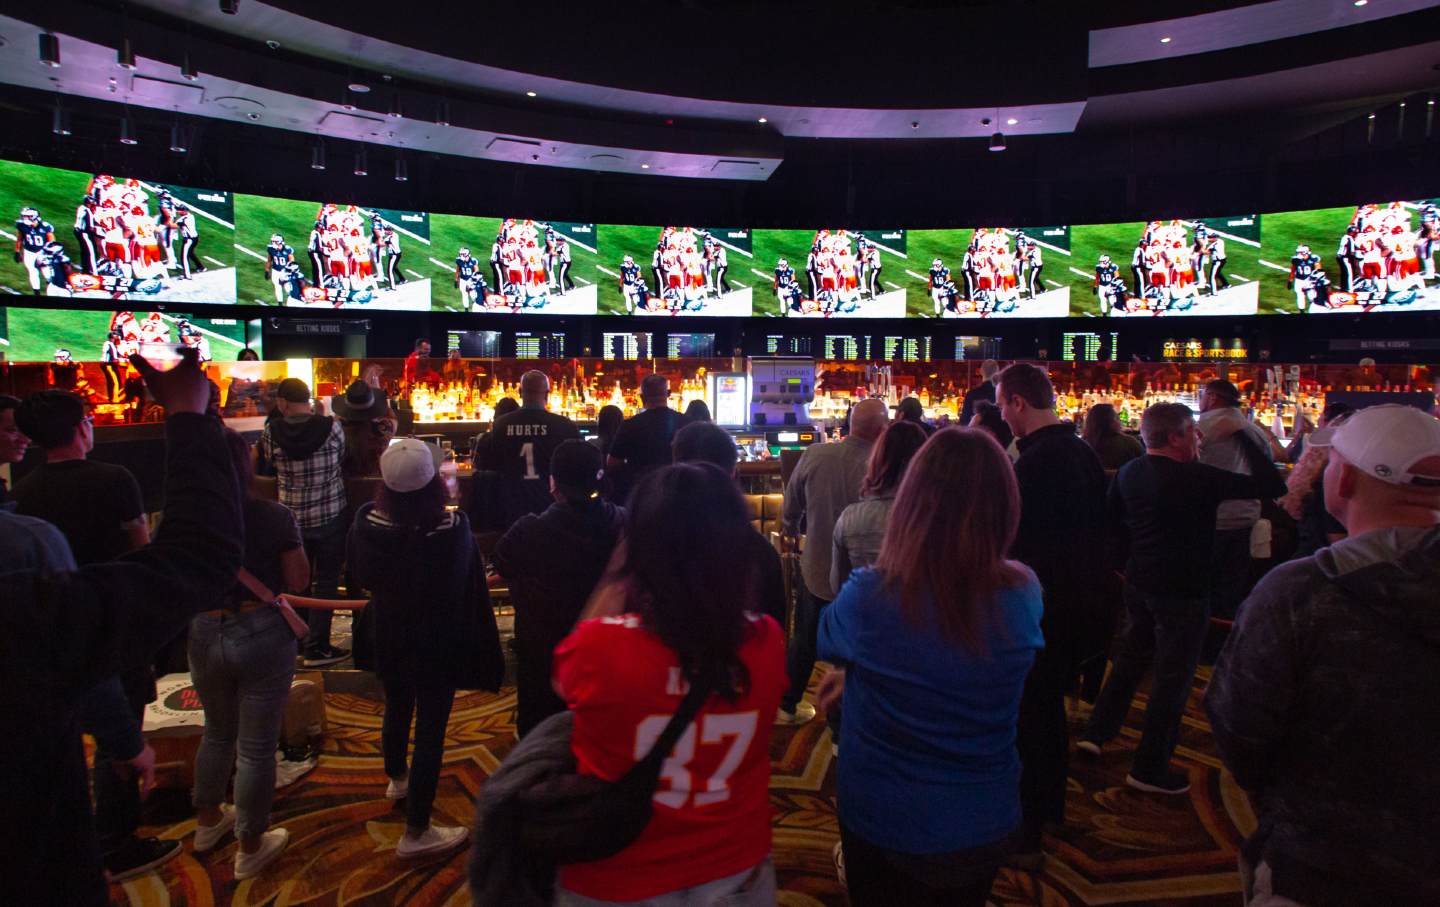 Crowds jam into Caesars Sports Book at Caesars Palace Hotel & Casino to bet on the Kansas City Chiefs vs. Philadelphia Eagles in Super Bowl LVII on February 12, 2023, in Las Vegas, Nev.